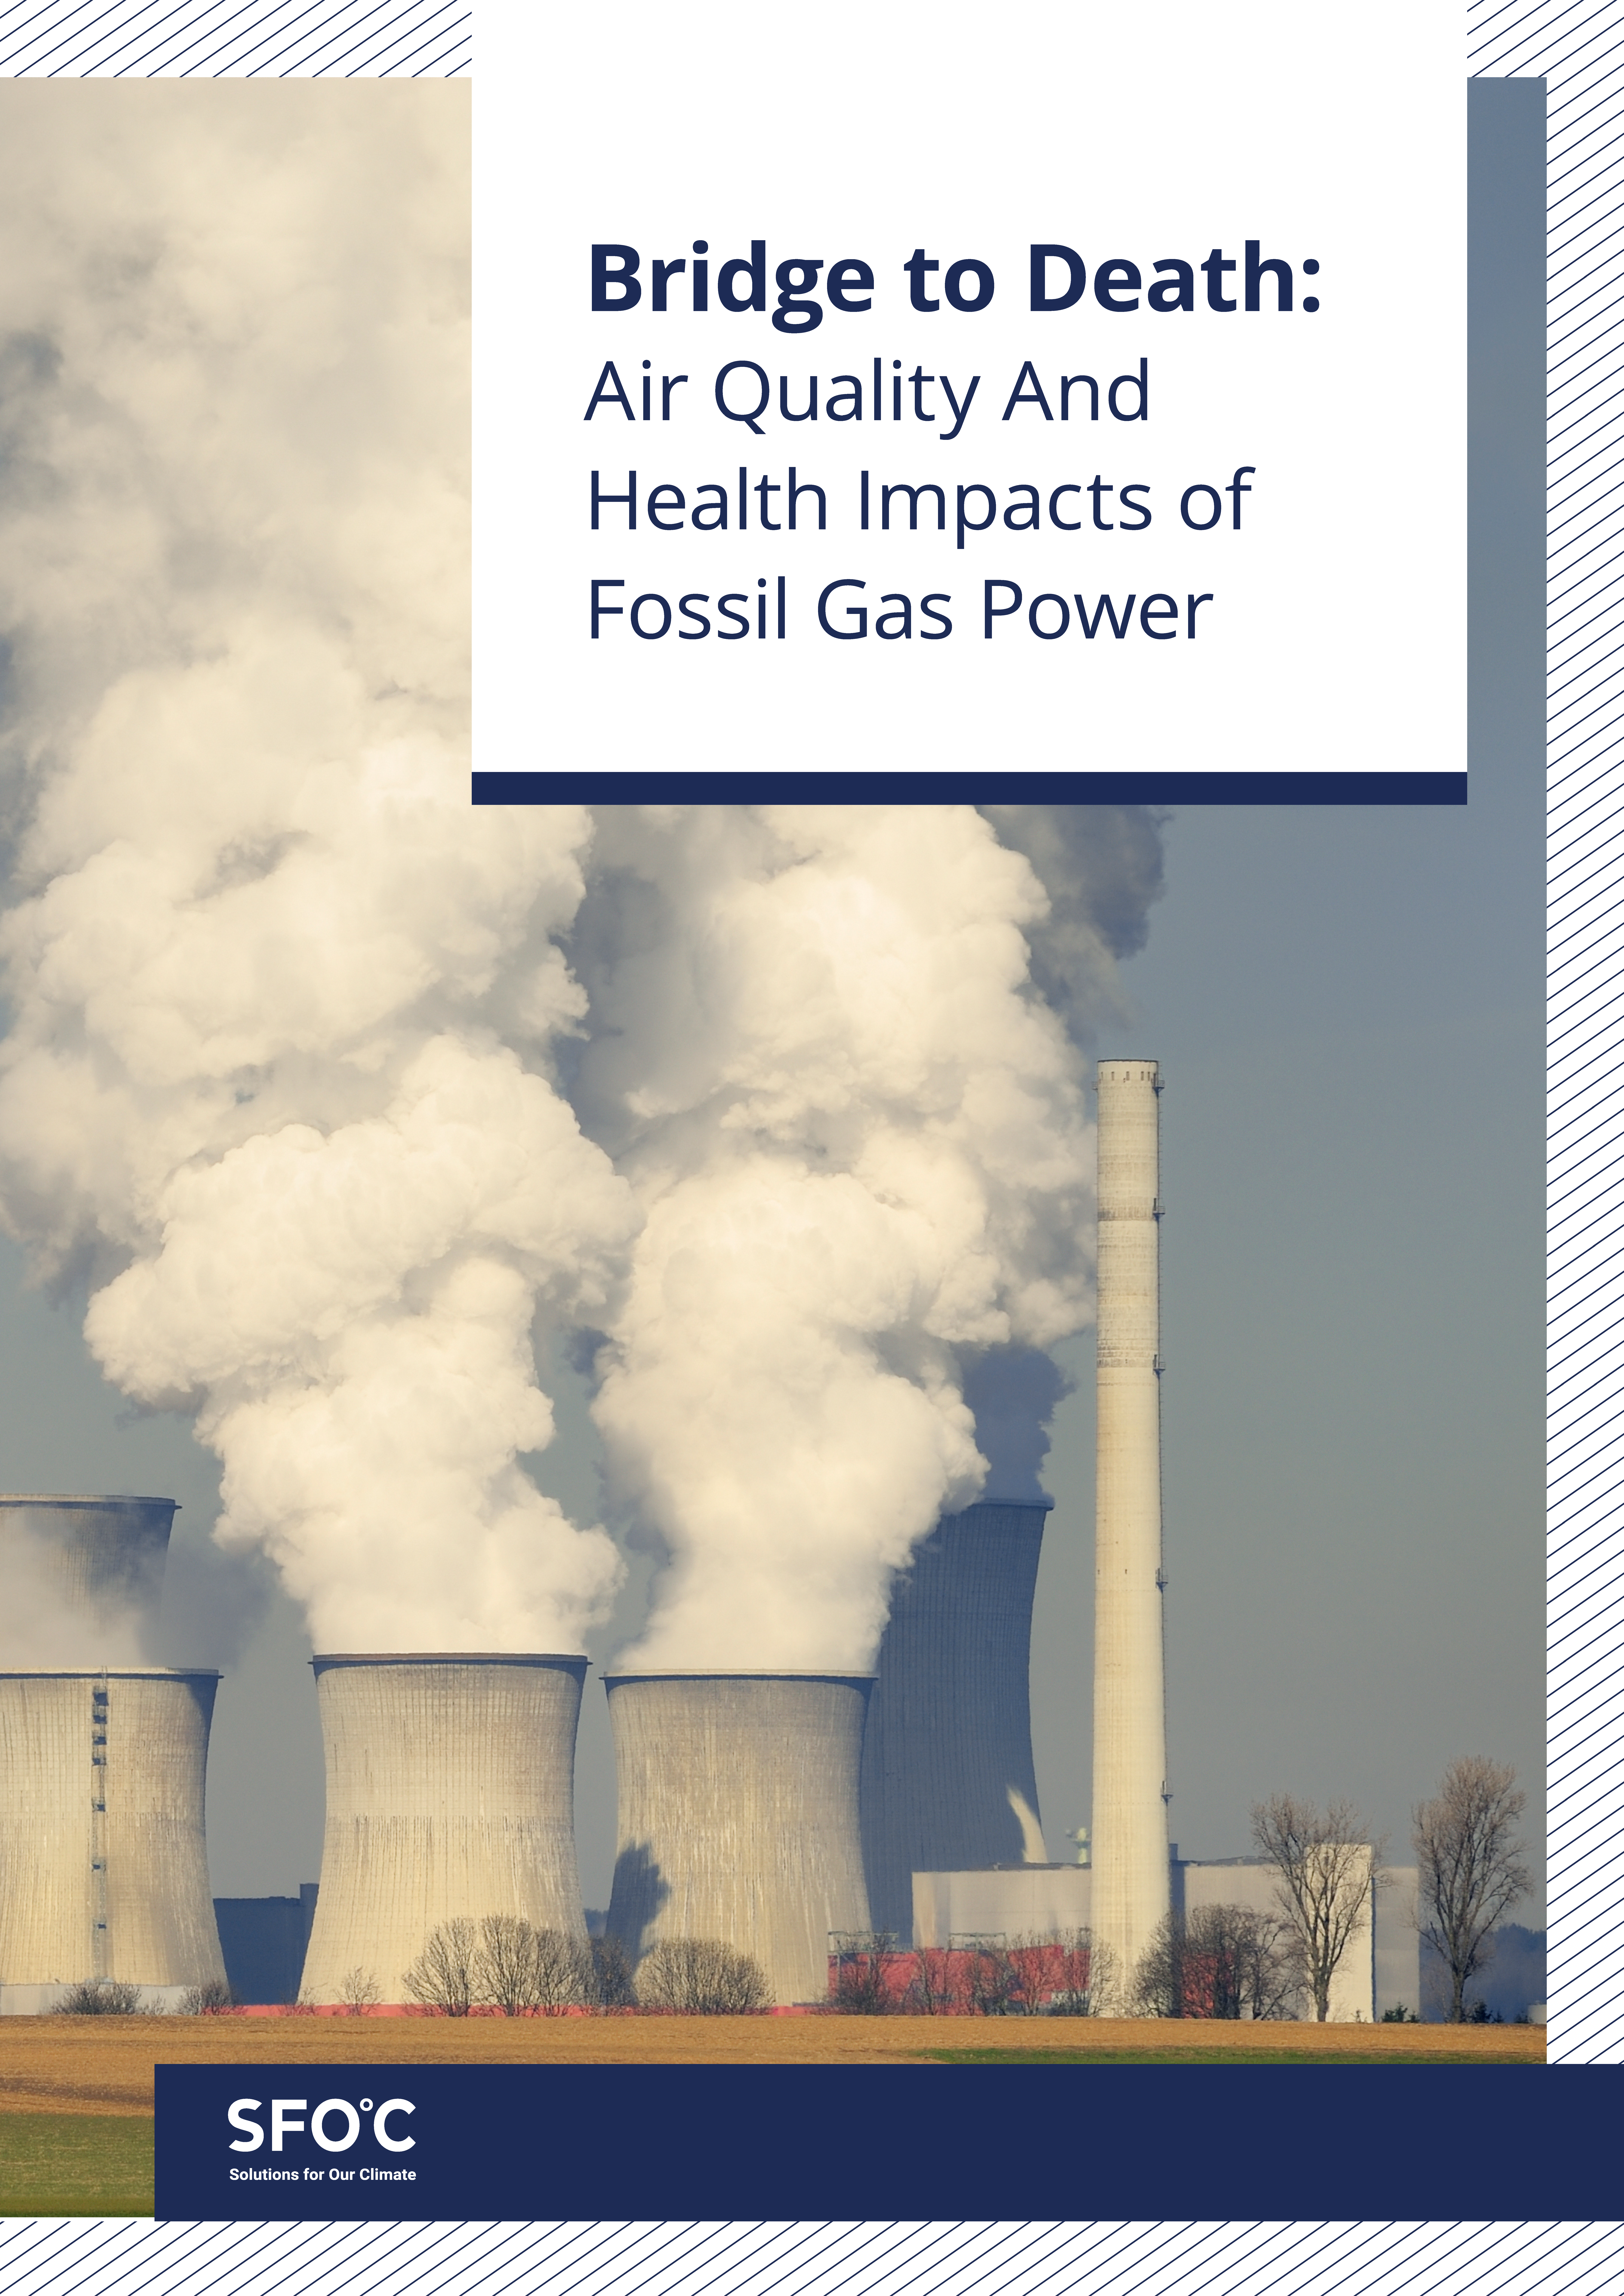 [SFOC] Bridge to Death_Air Quality And Health Impacts of Fossil Gas Power